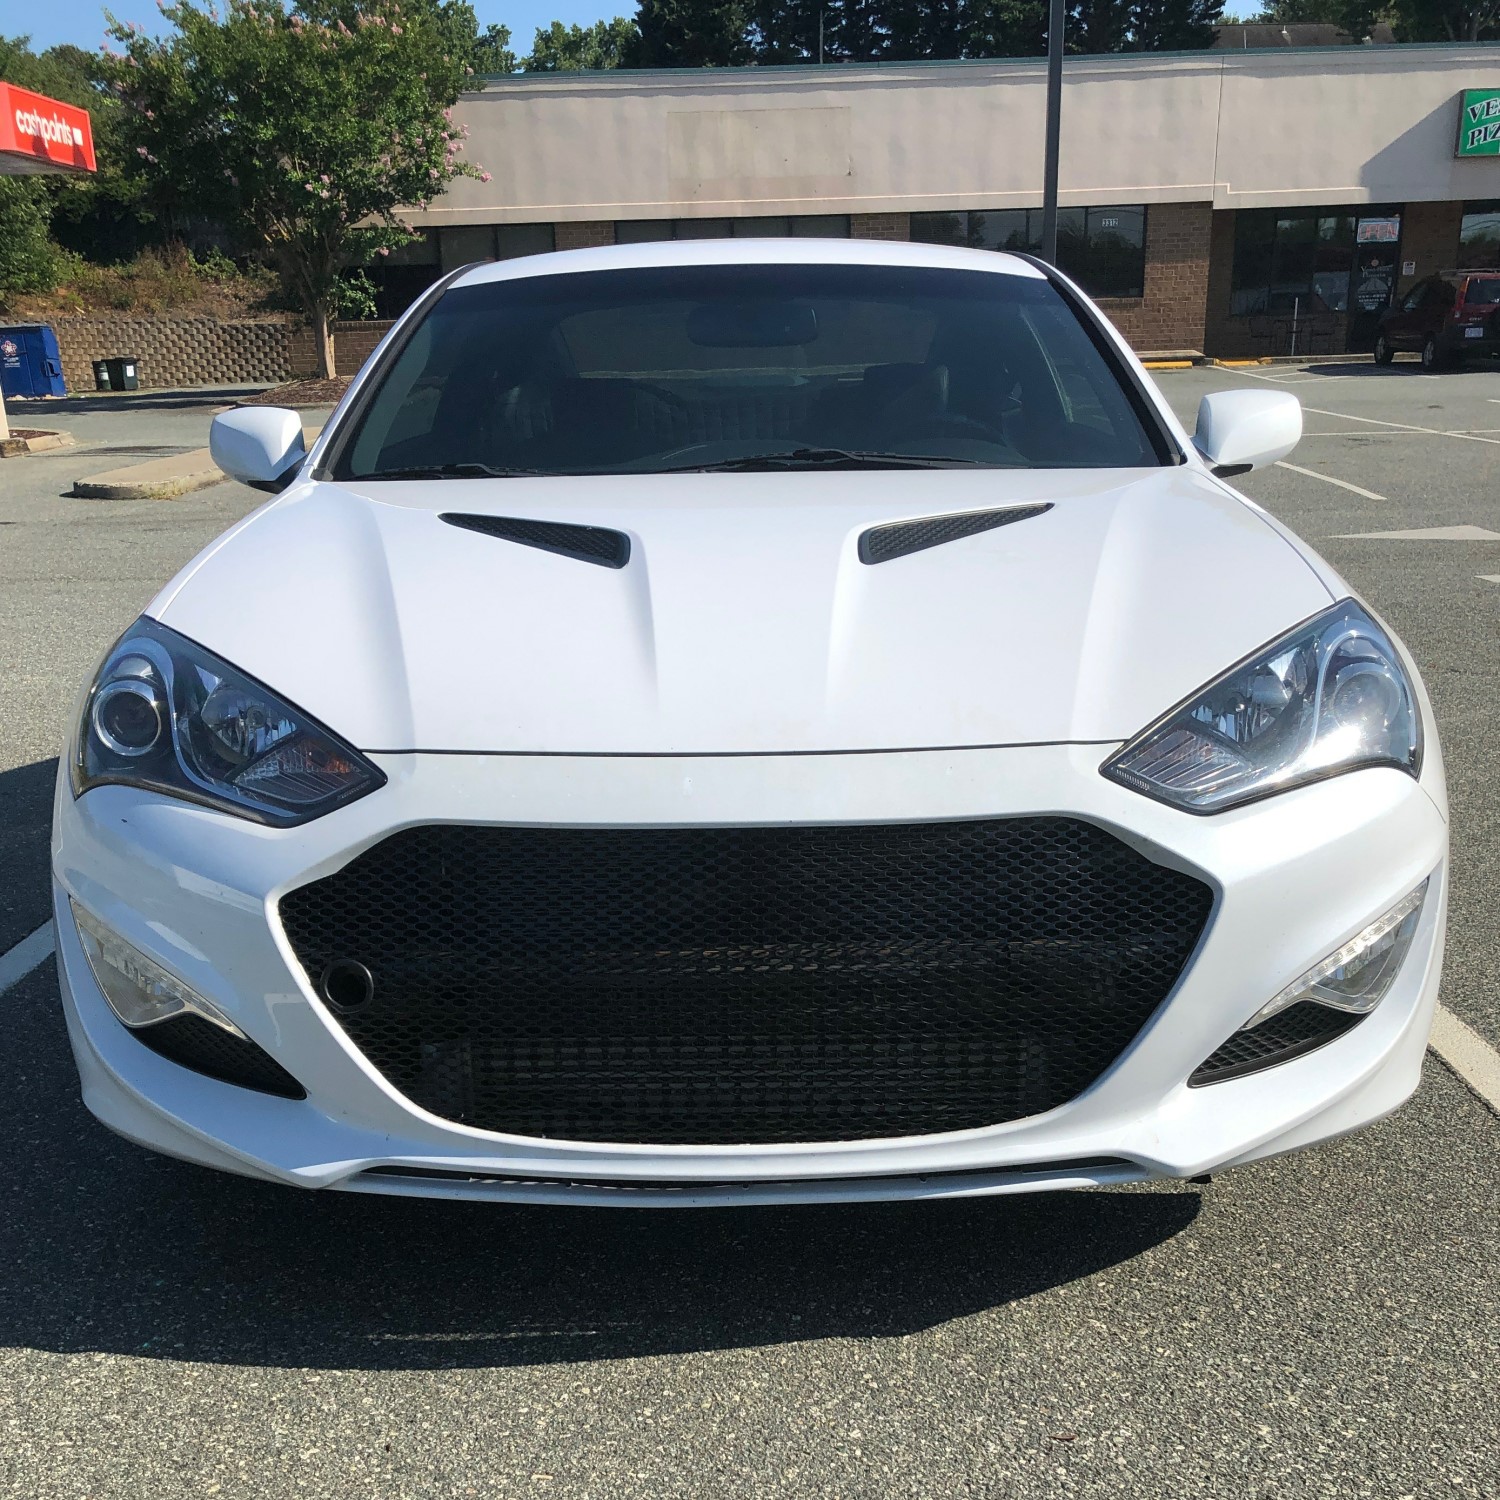 White Hyundai Genesis Coupe with New Mesh Grille: A Stylish Upgrade